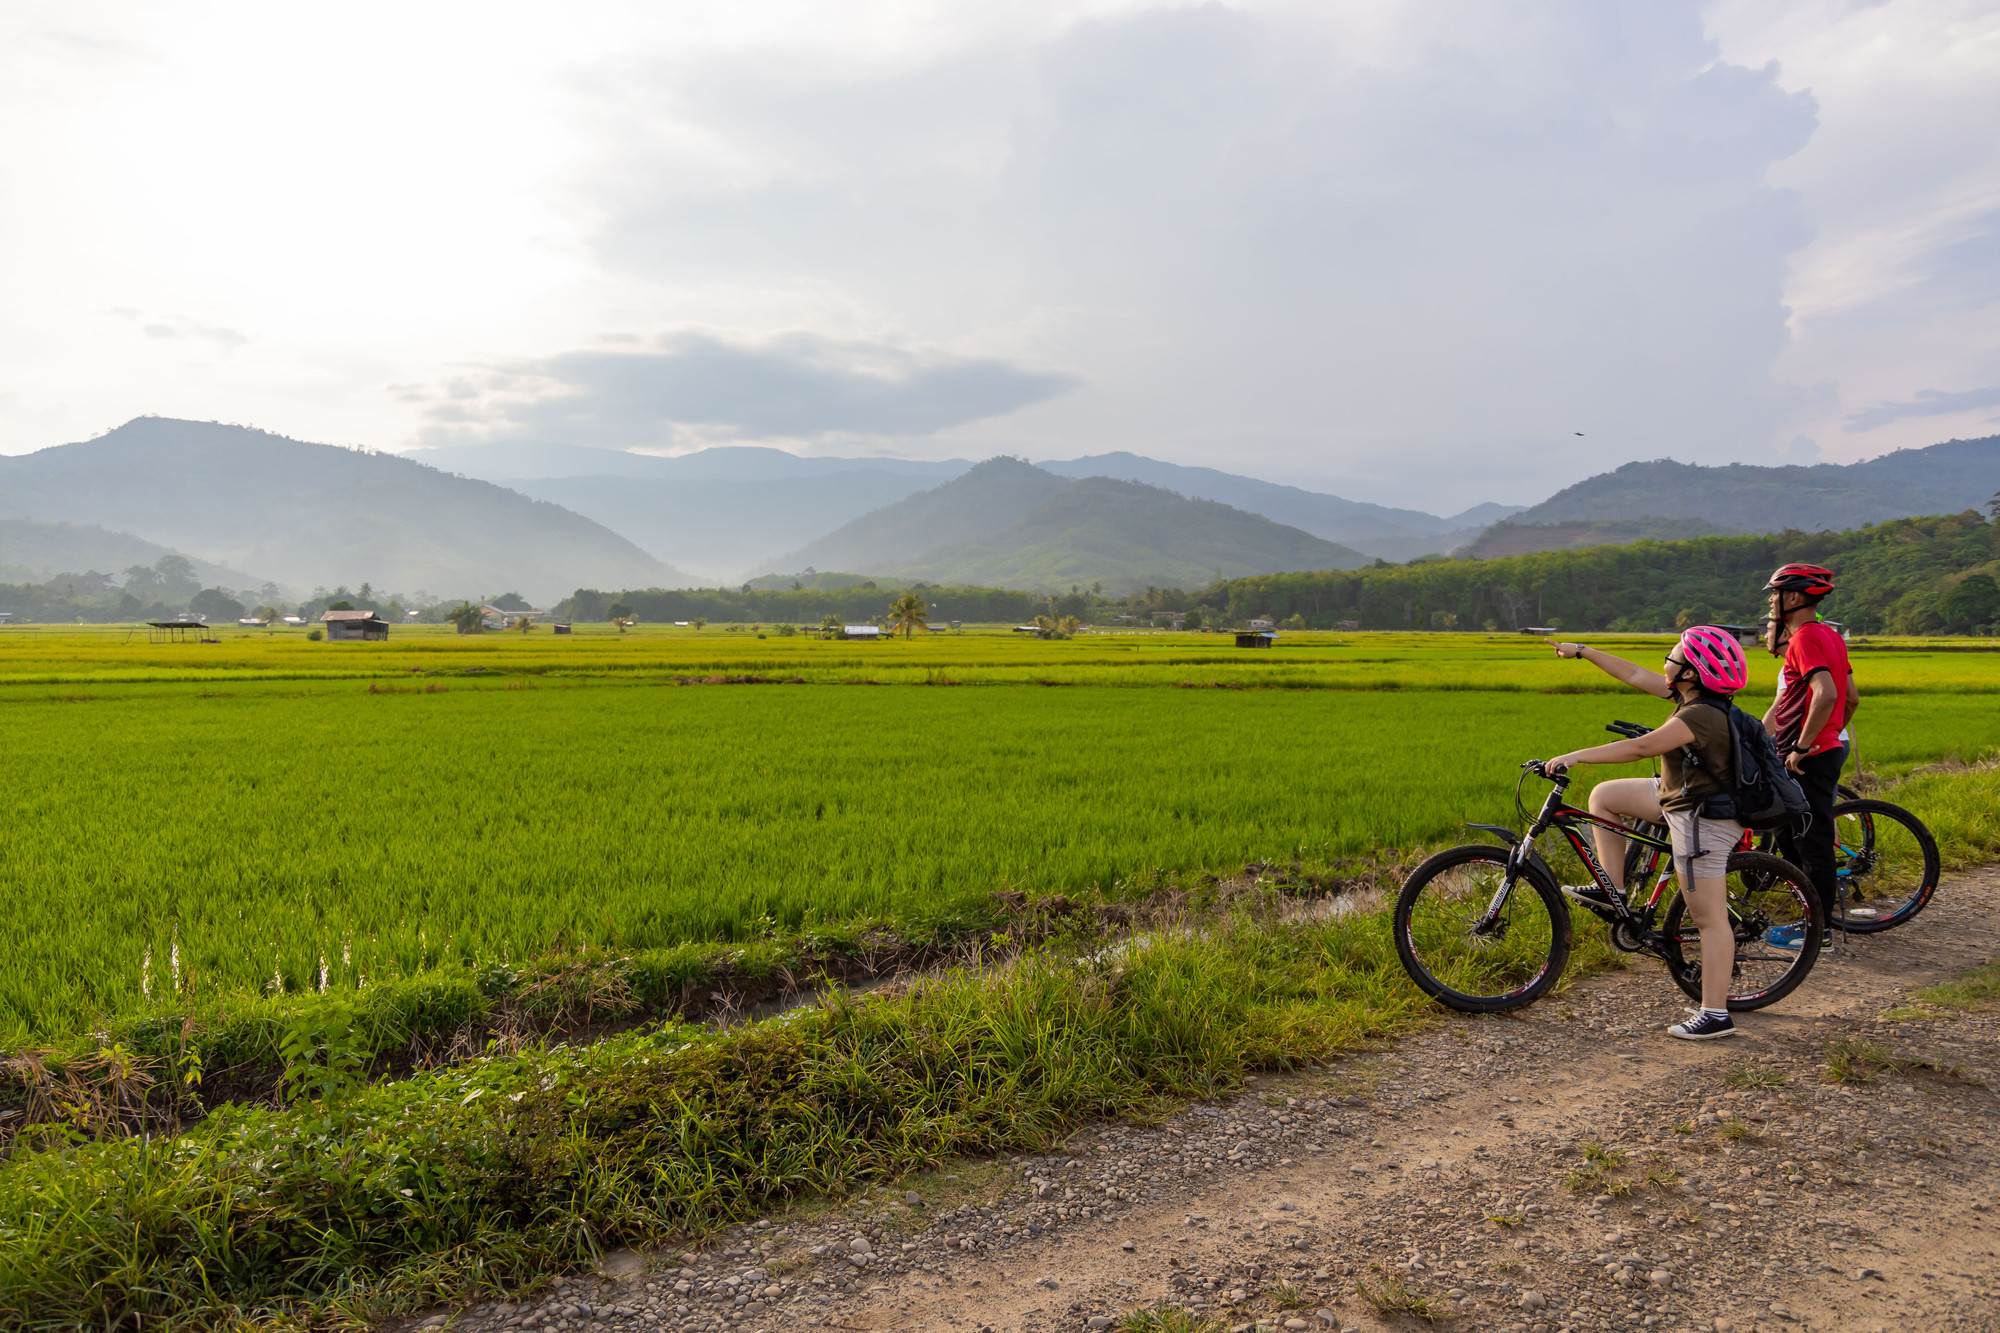 Things to do in Sabah - cycling in Paddy Field